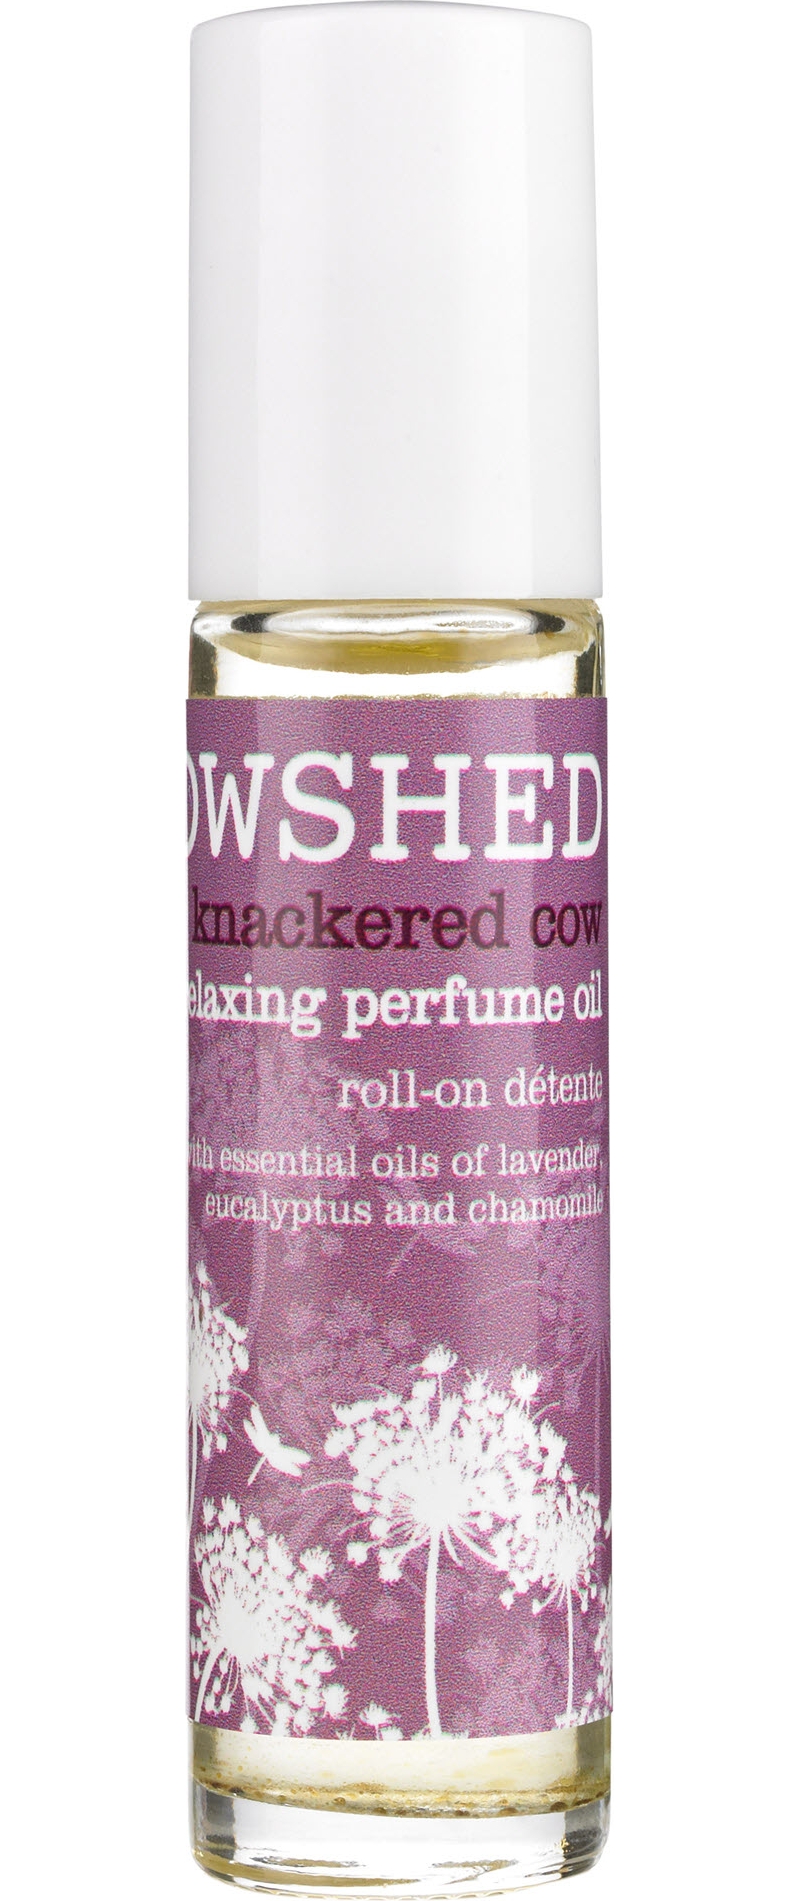 COWSHED   Knackered Cow perfume oil roll on